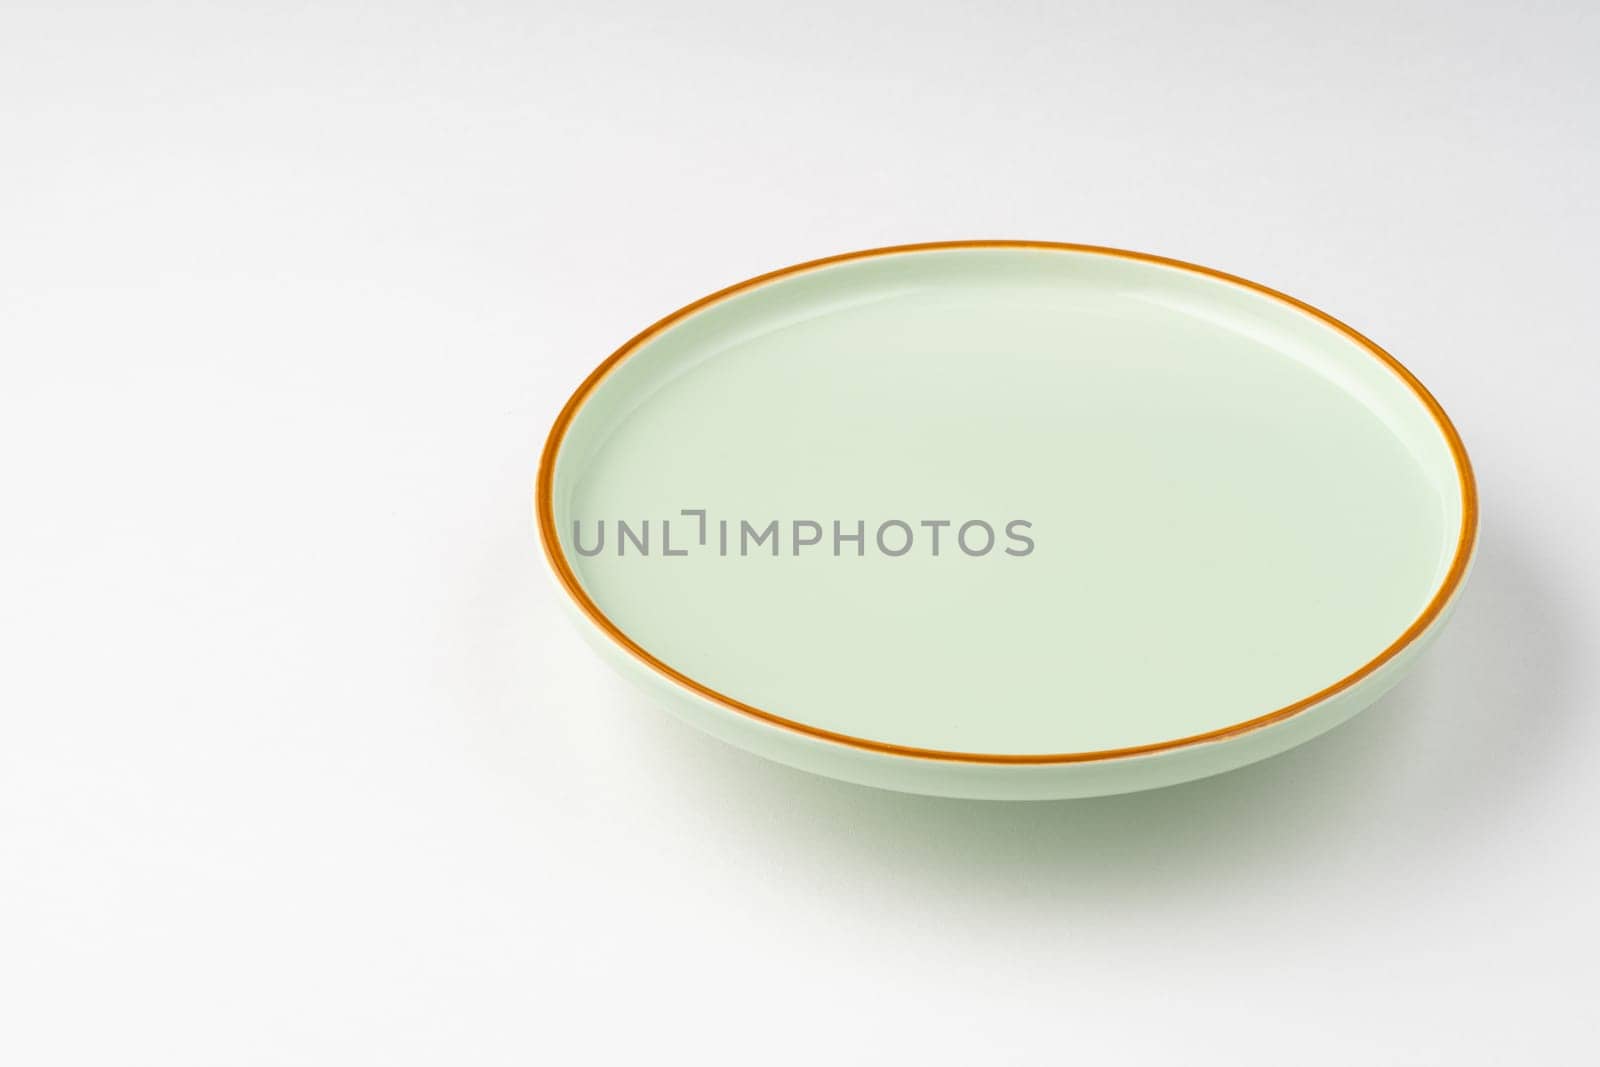 The pastel green ceramic plate with orange outlines on a white background